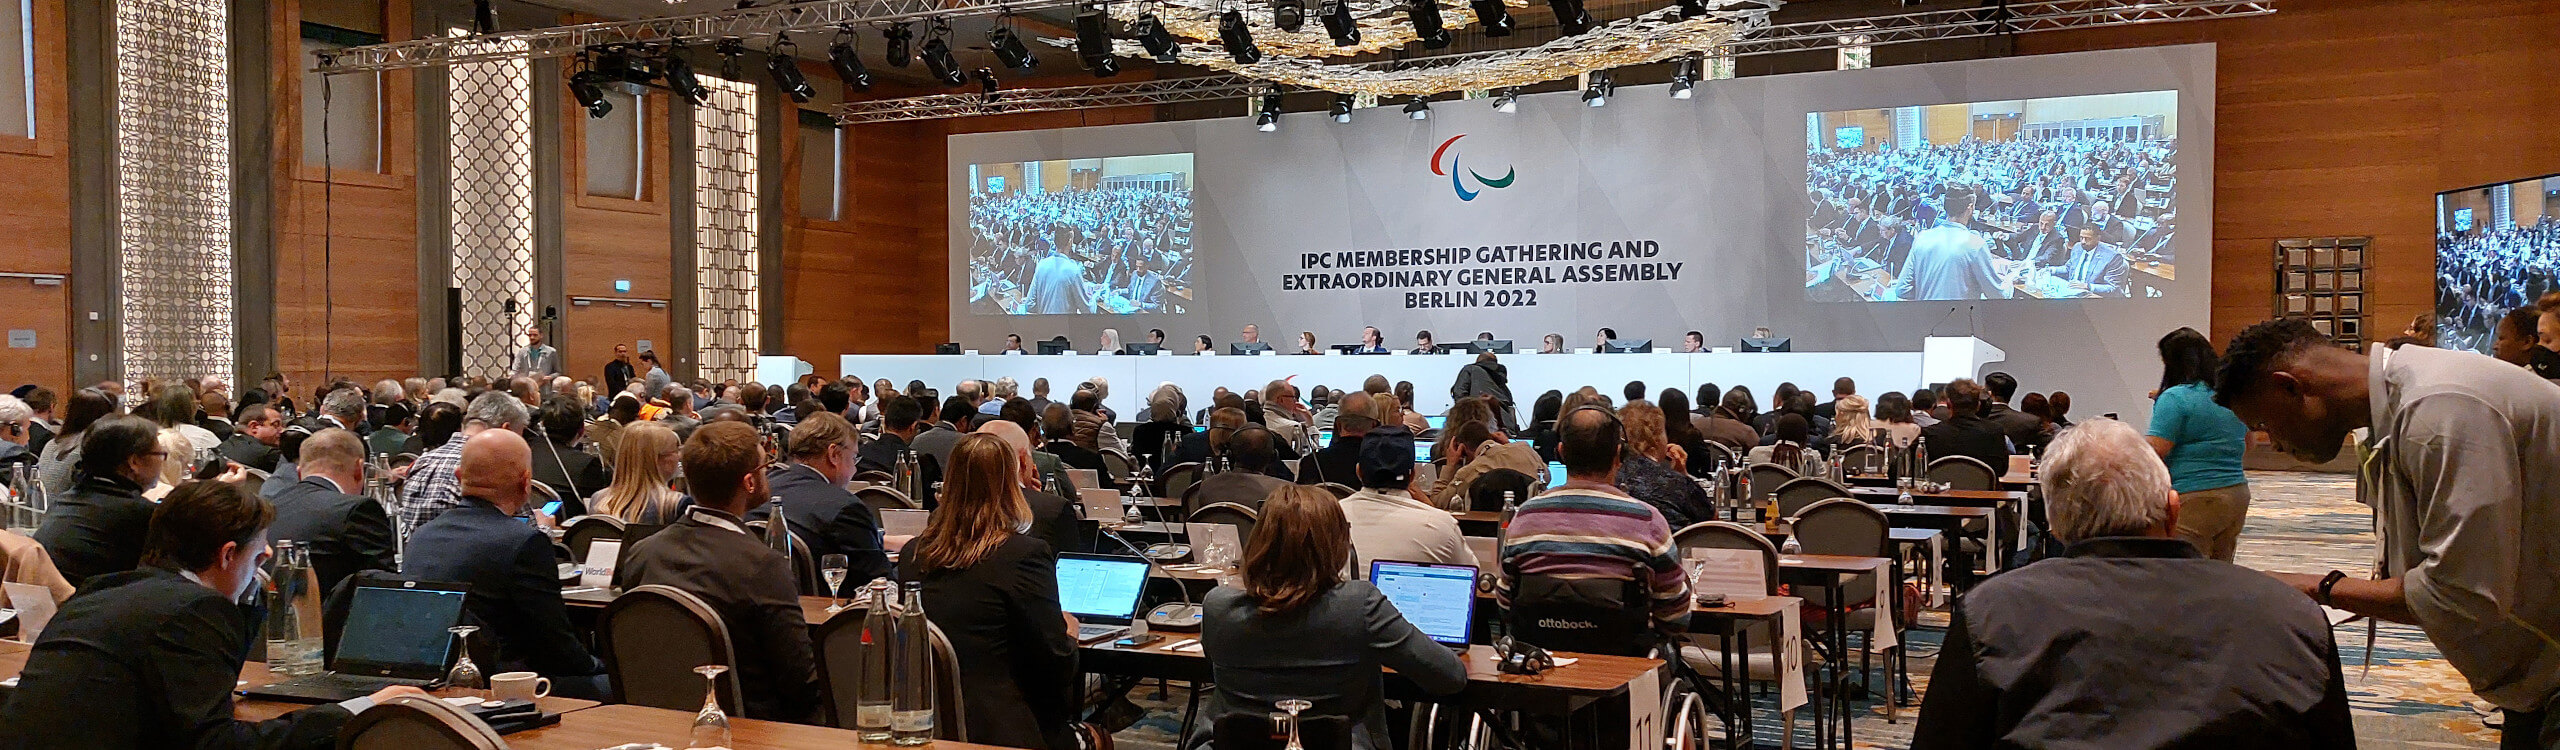 Event-Photo: International Paralympics Committee